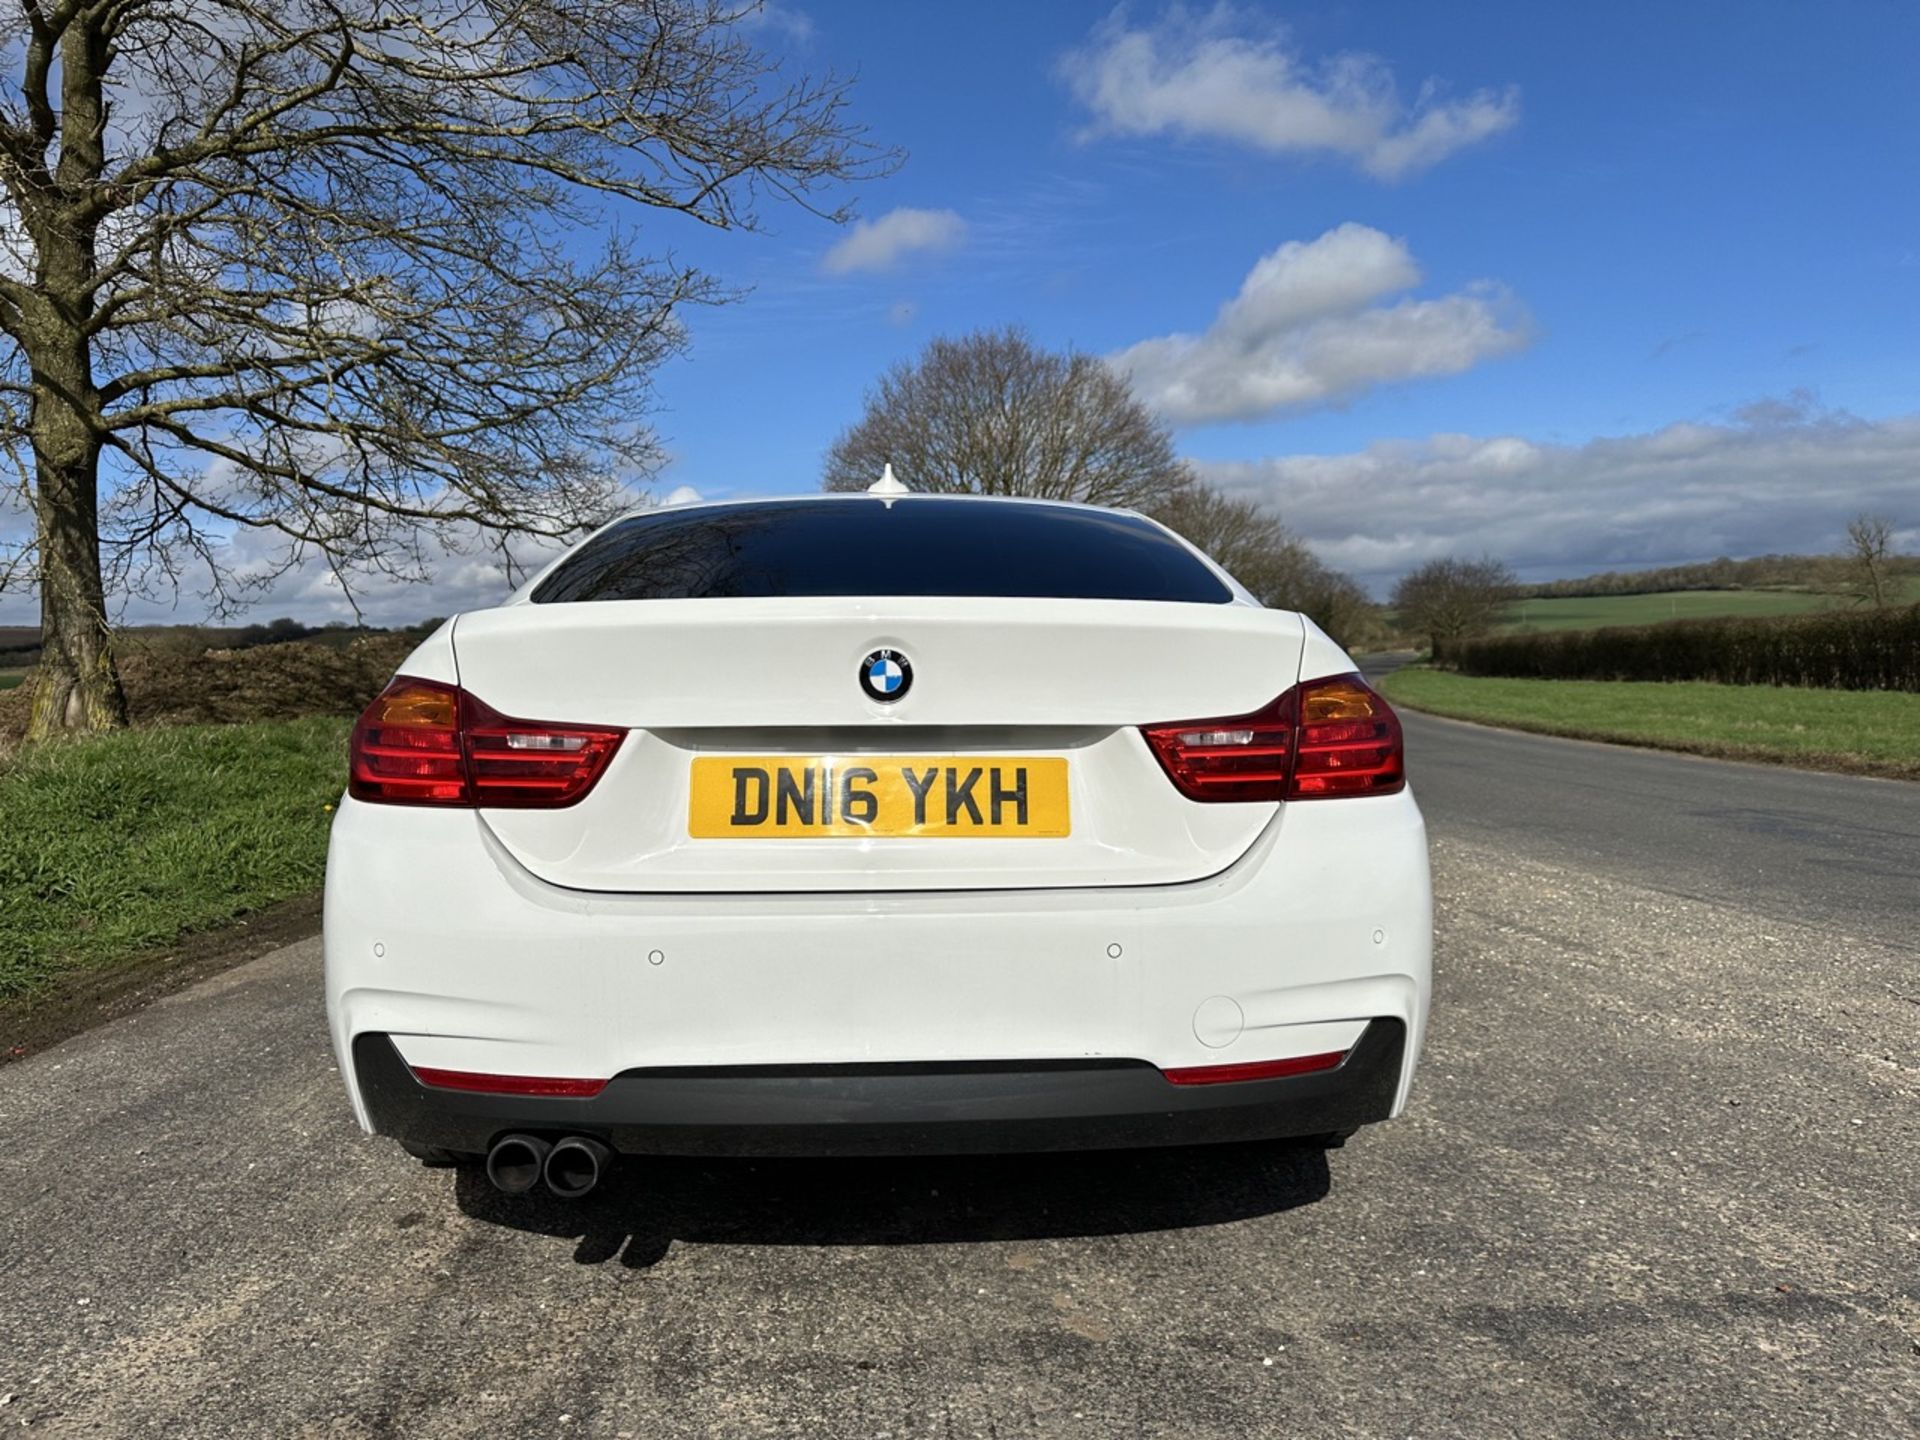 BMW 4 SERIES 420i M Sport 5dr [Professional Media] Manual - Petrol - 2.0 - Coupe- 54k miles - 2016 - Image 4 of 15